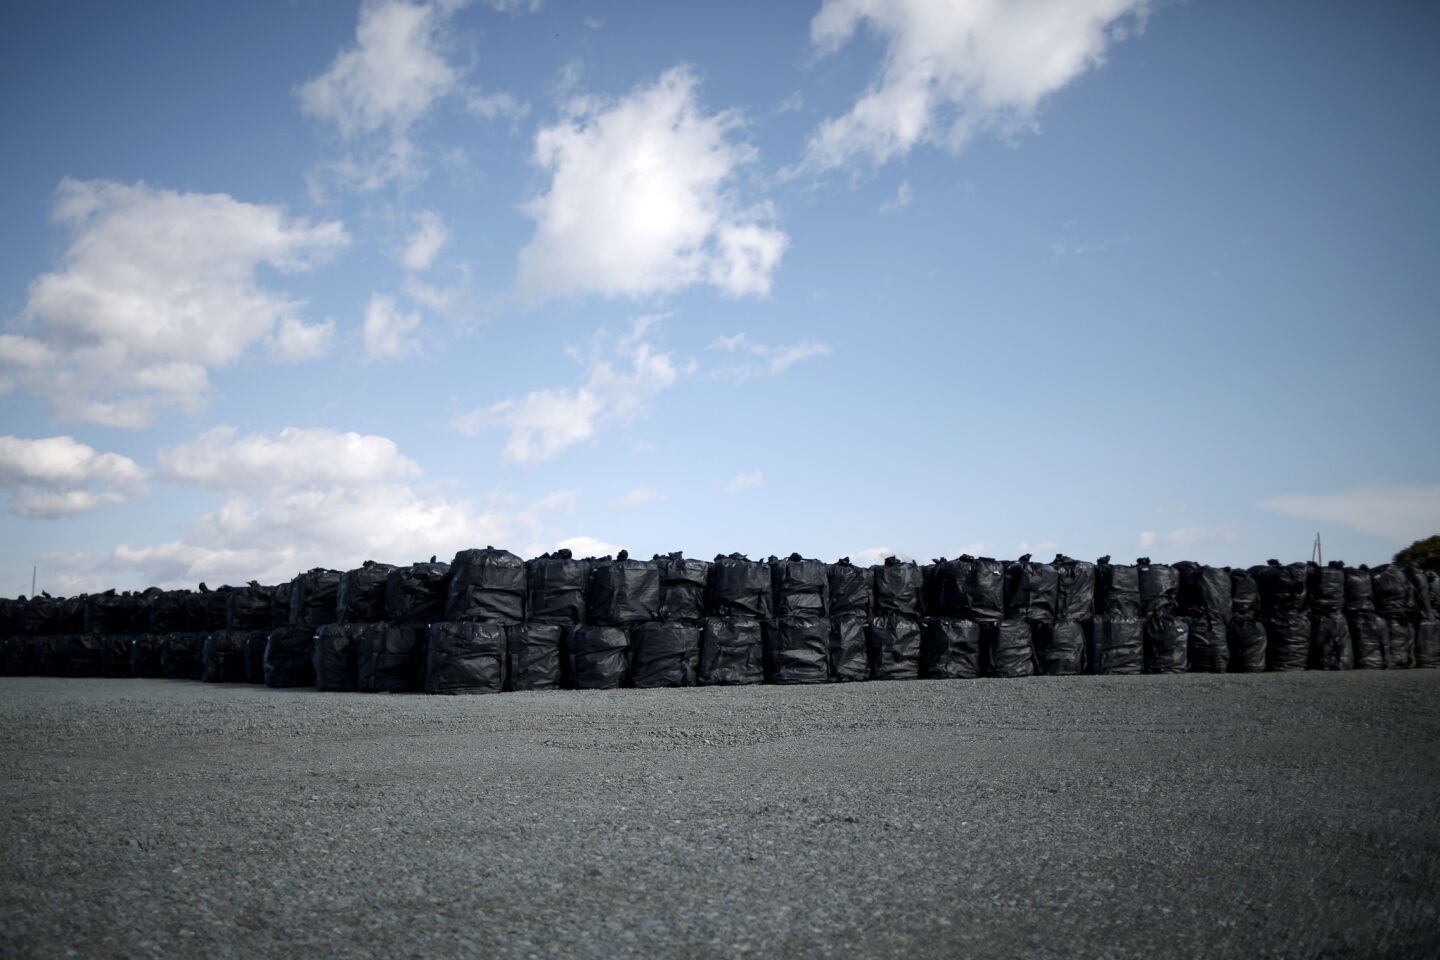 Thousands of bags of radiation-contaminated soil and debris wait to be processed in the town of Naraha.